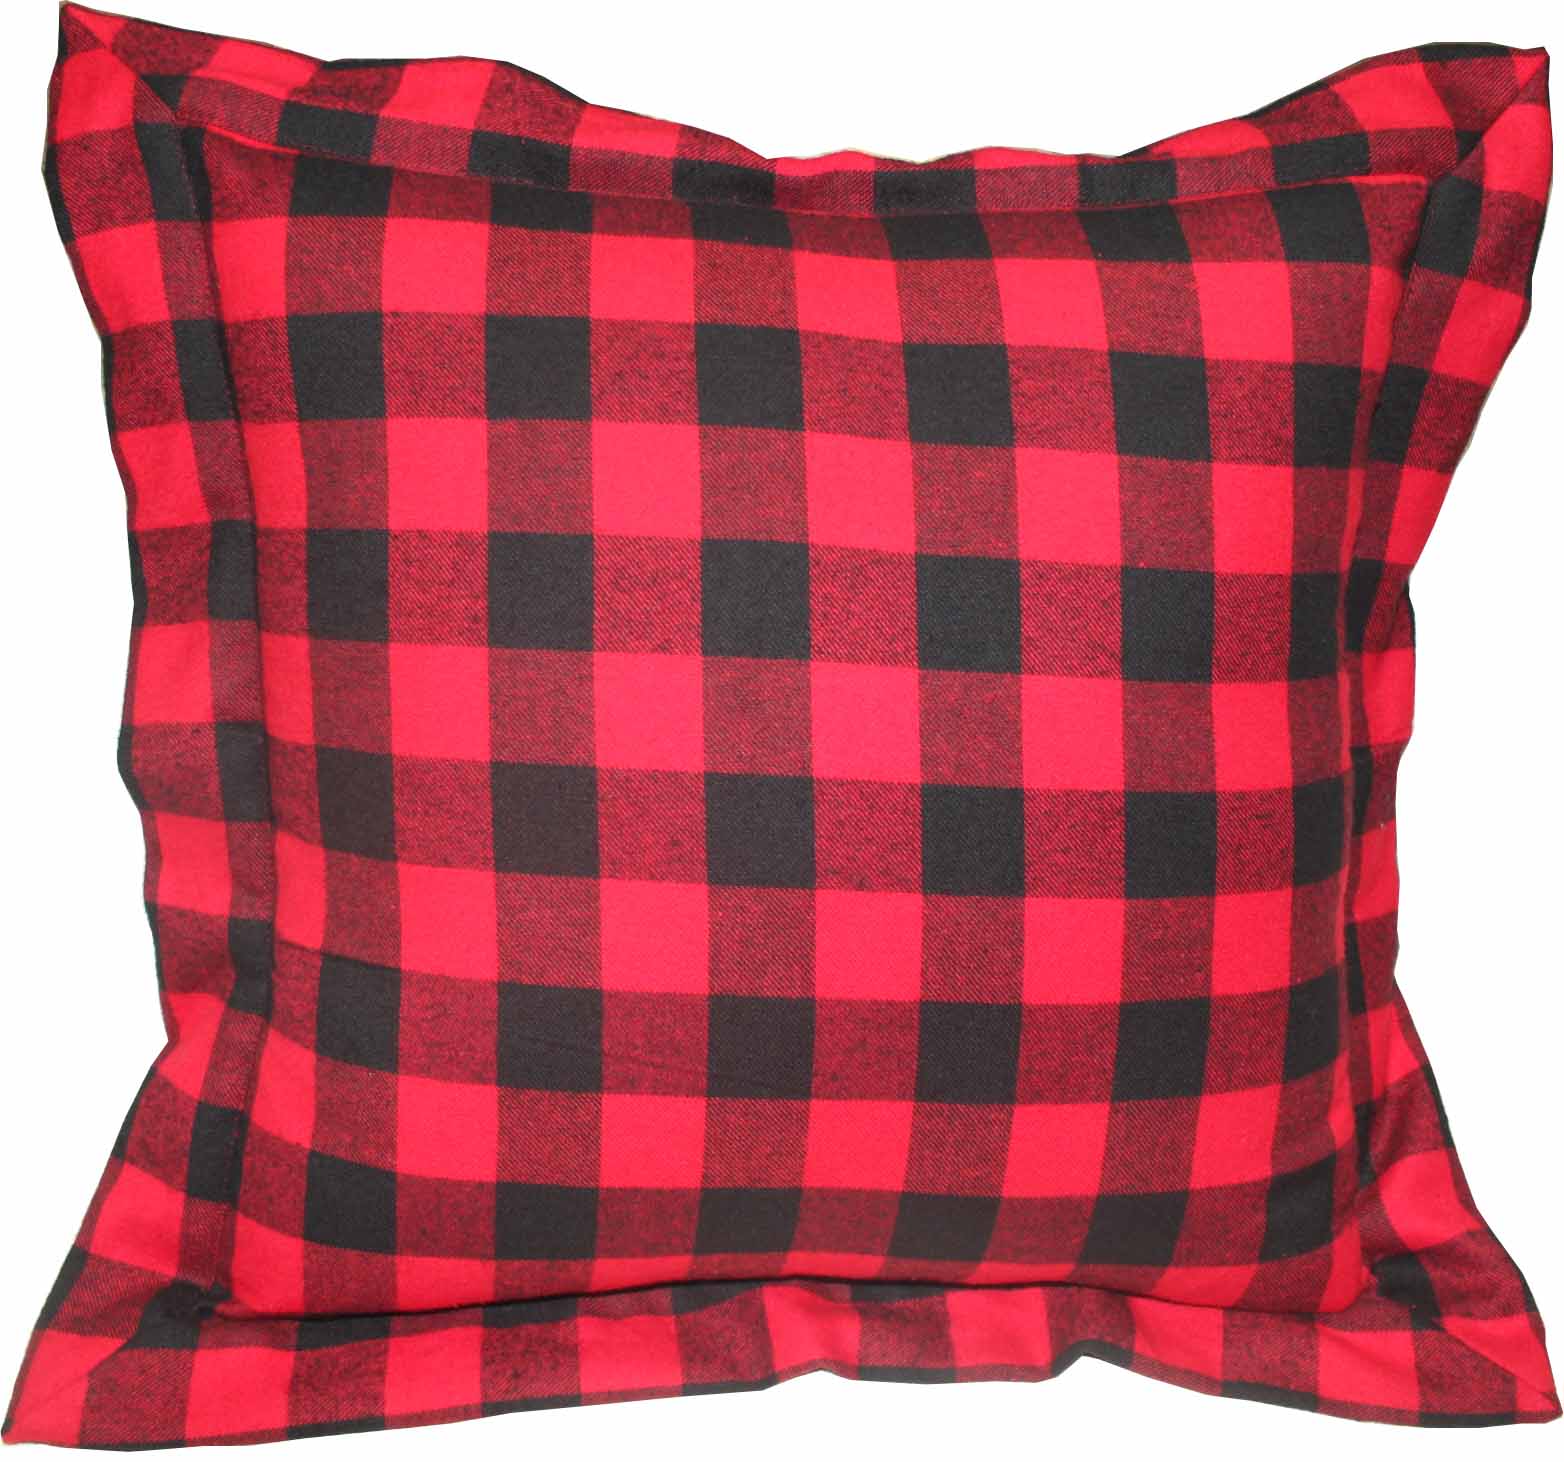 Red and Black Twill Buffalo Check,Fabric Toss Pillow 16"W x 16"L,Flanged